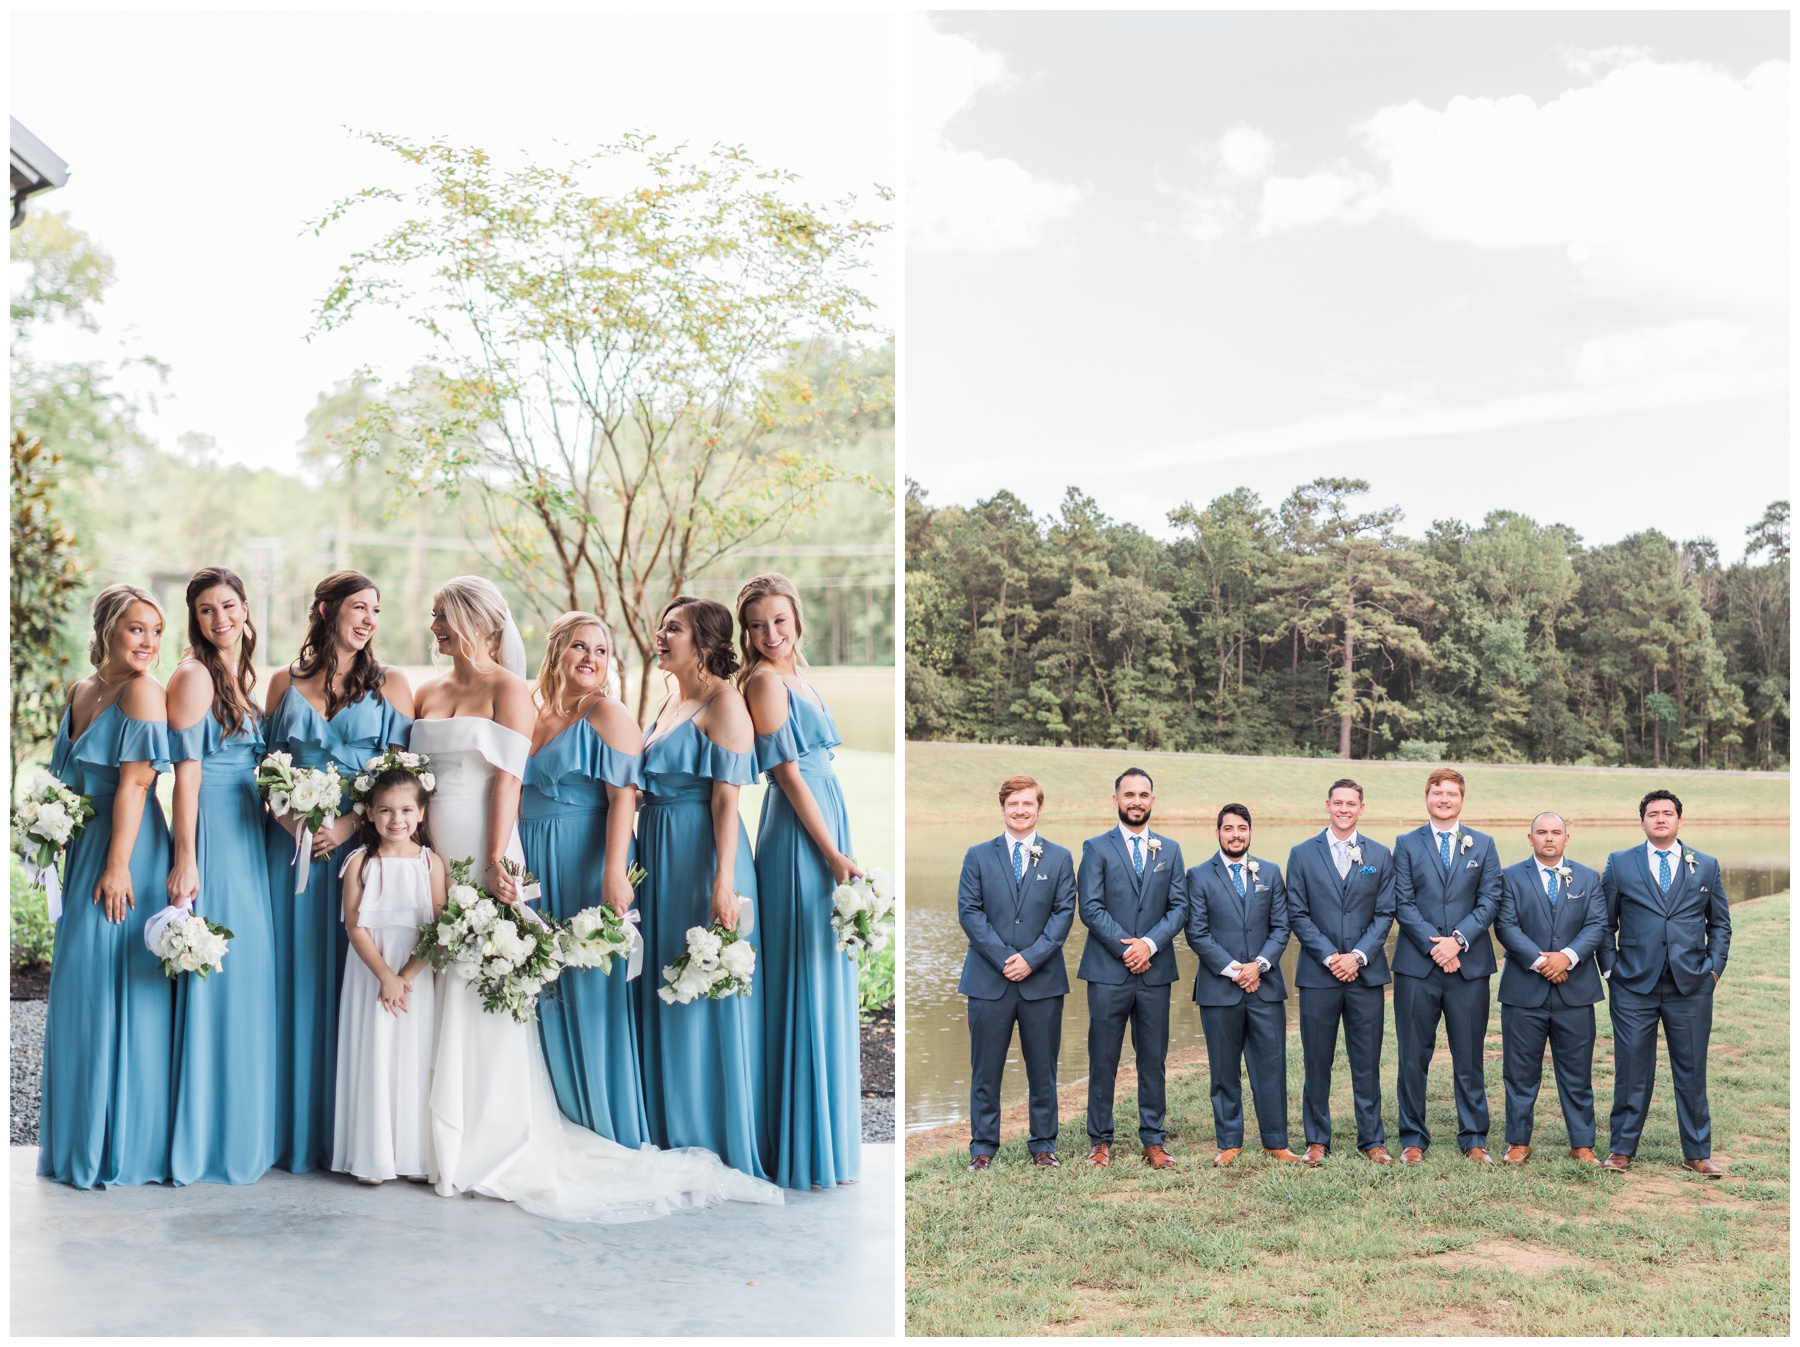 Dusty blue bridesmaids dresses and navy suits